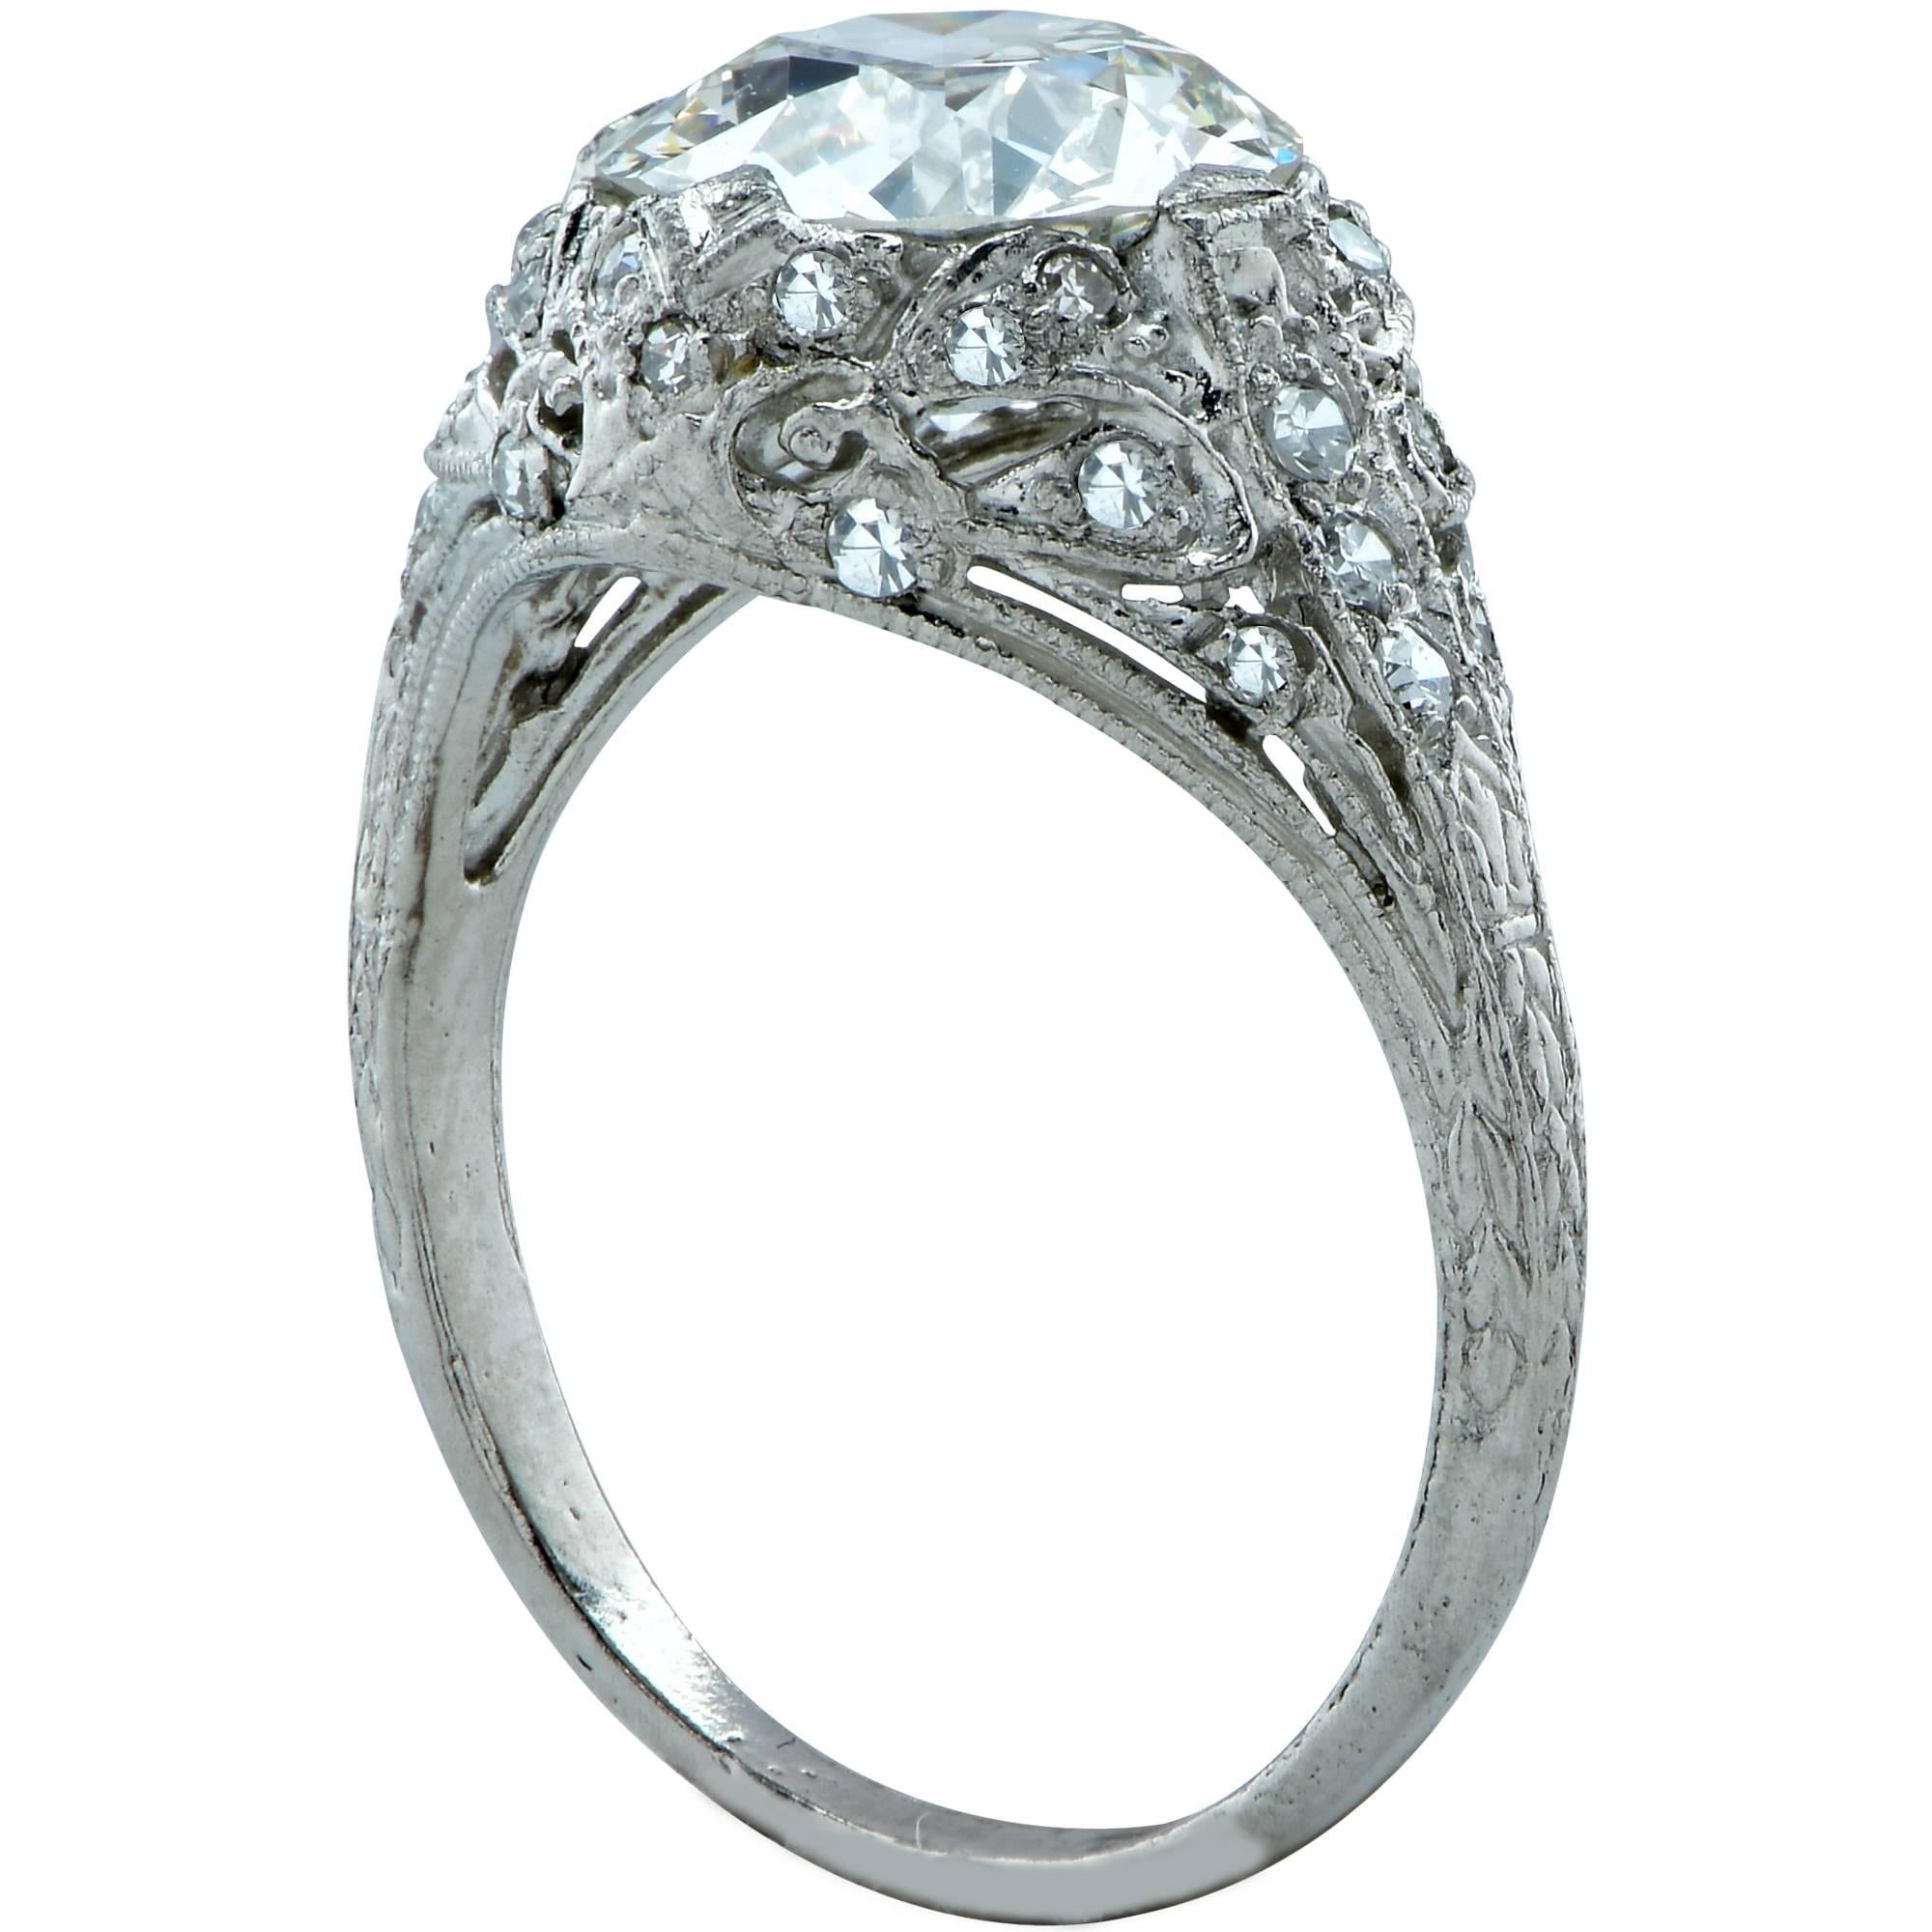 Platinum Art Deco ring showcasing a GIA graded 2ct European cut diamond J color and VS1 clarity surrounded by 32 single cut diamonds weighing approximately .50cts.

The ring is a size 5 and can be sized up or down.
Measurements are available upon